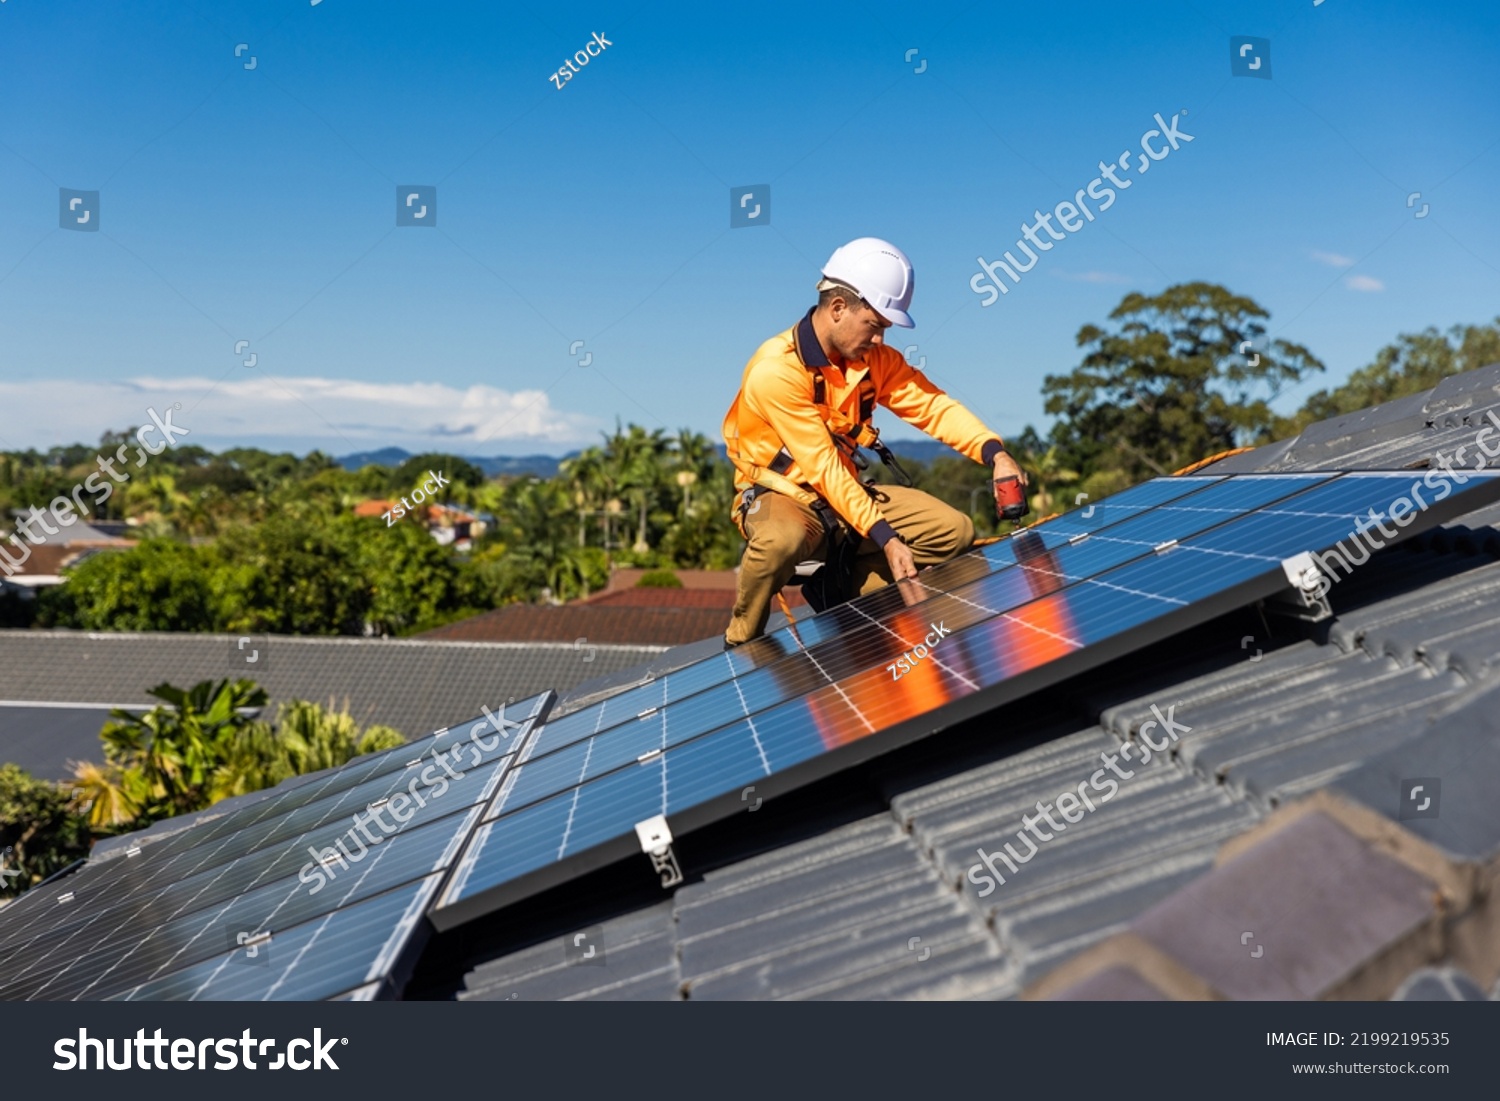 Solar panel technician with drill installing solar panels on house roof on a sunny day. #2199219535